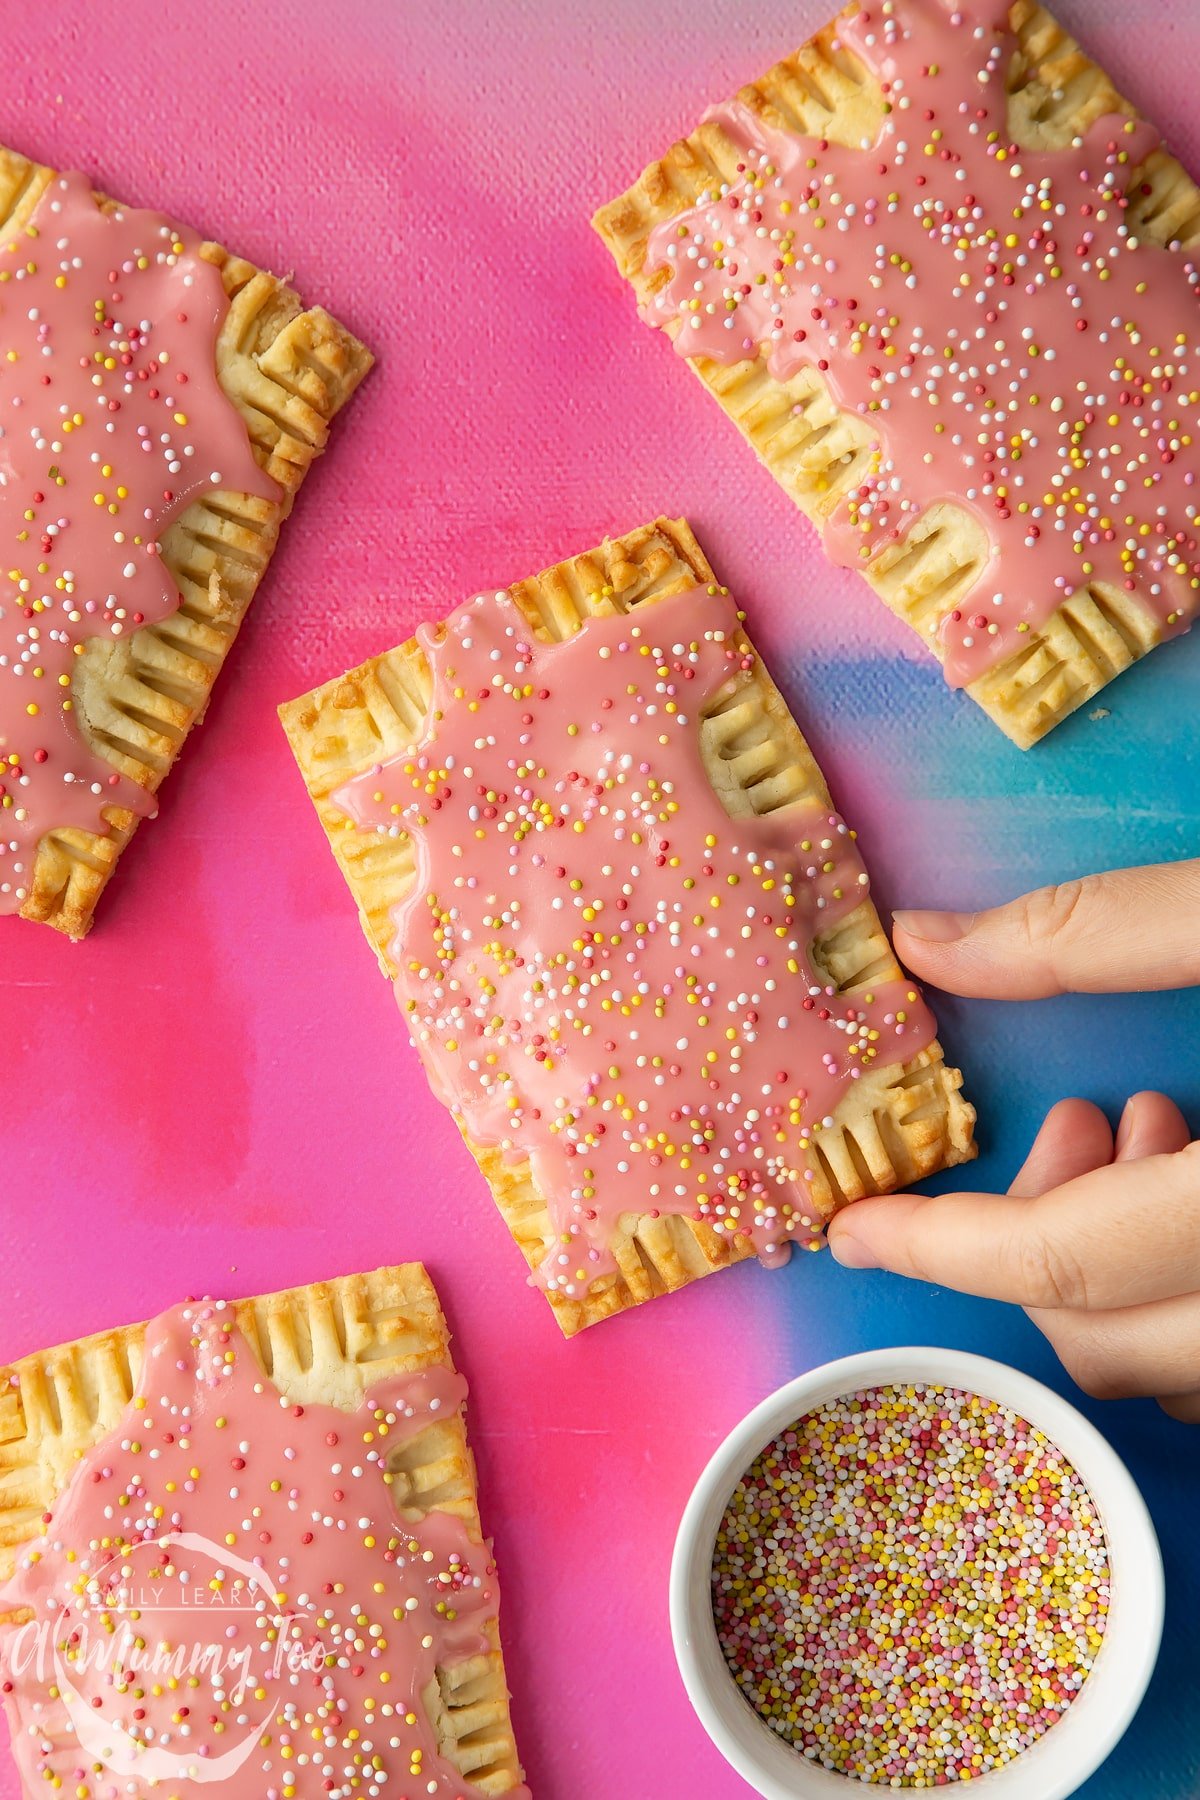 Gluten free pop tarts with pink icing and pastel sprinkles on a bright pink and blue backdrop. A hand reaches for one.